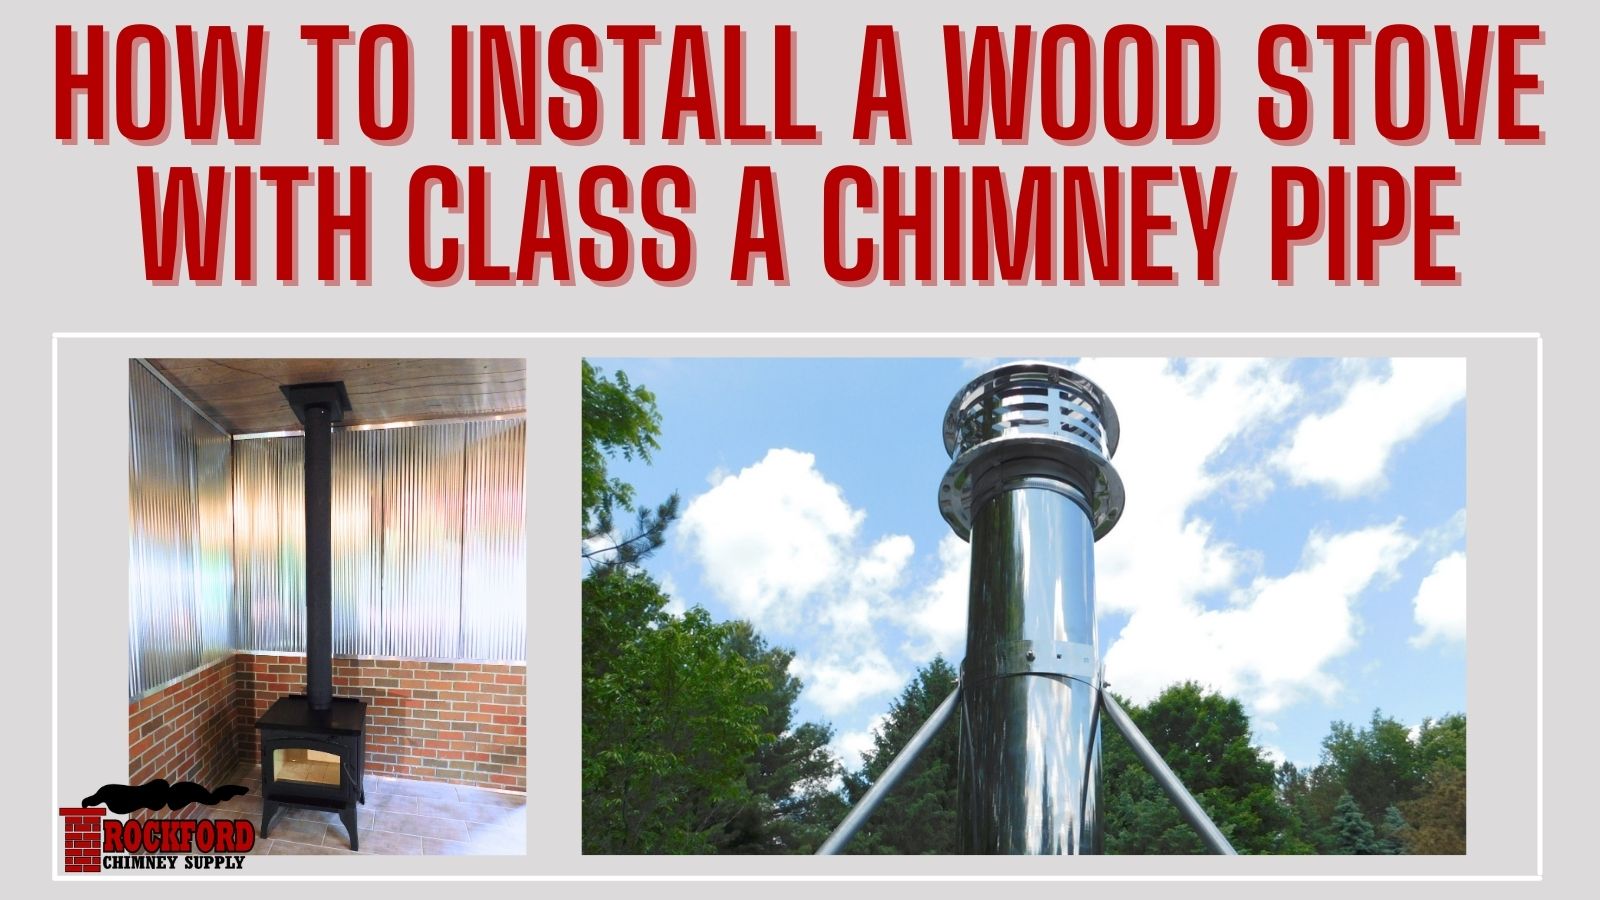 How Do Chimneys Work? How a Chimney Works Explained - Rockford Chimney